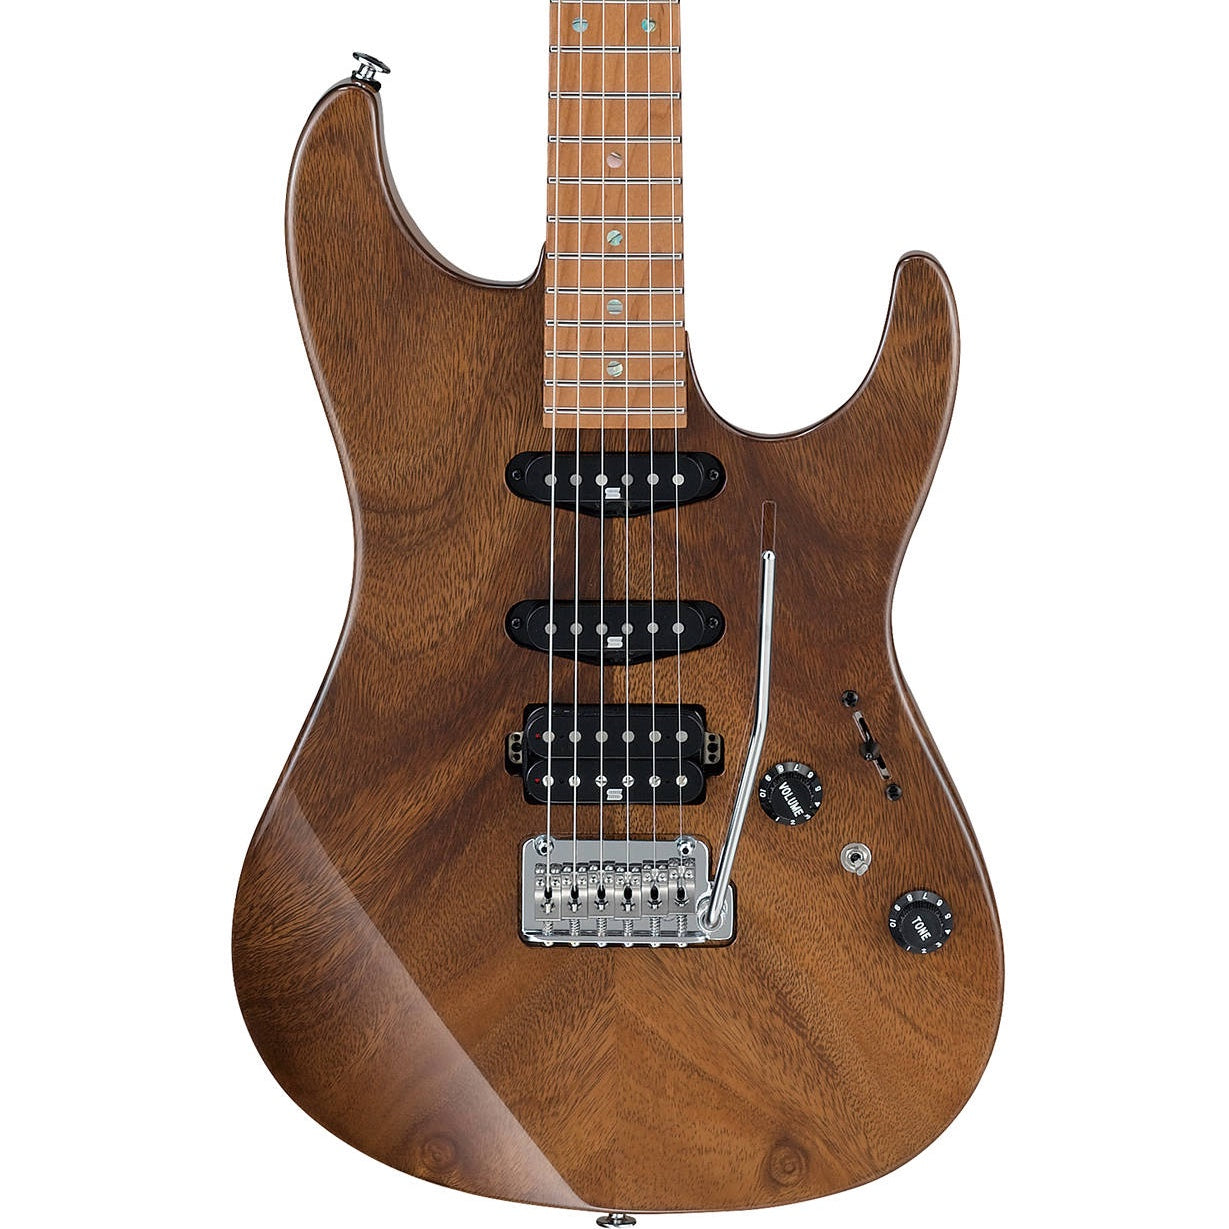 Ibanez TQM1-NT Tom Quayle Signature Electric Guitar Natural | Music Experience | Shop Online | South Africa